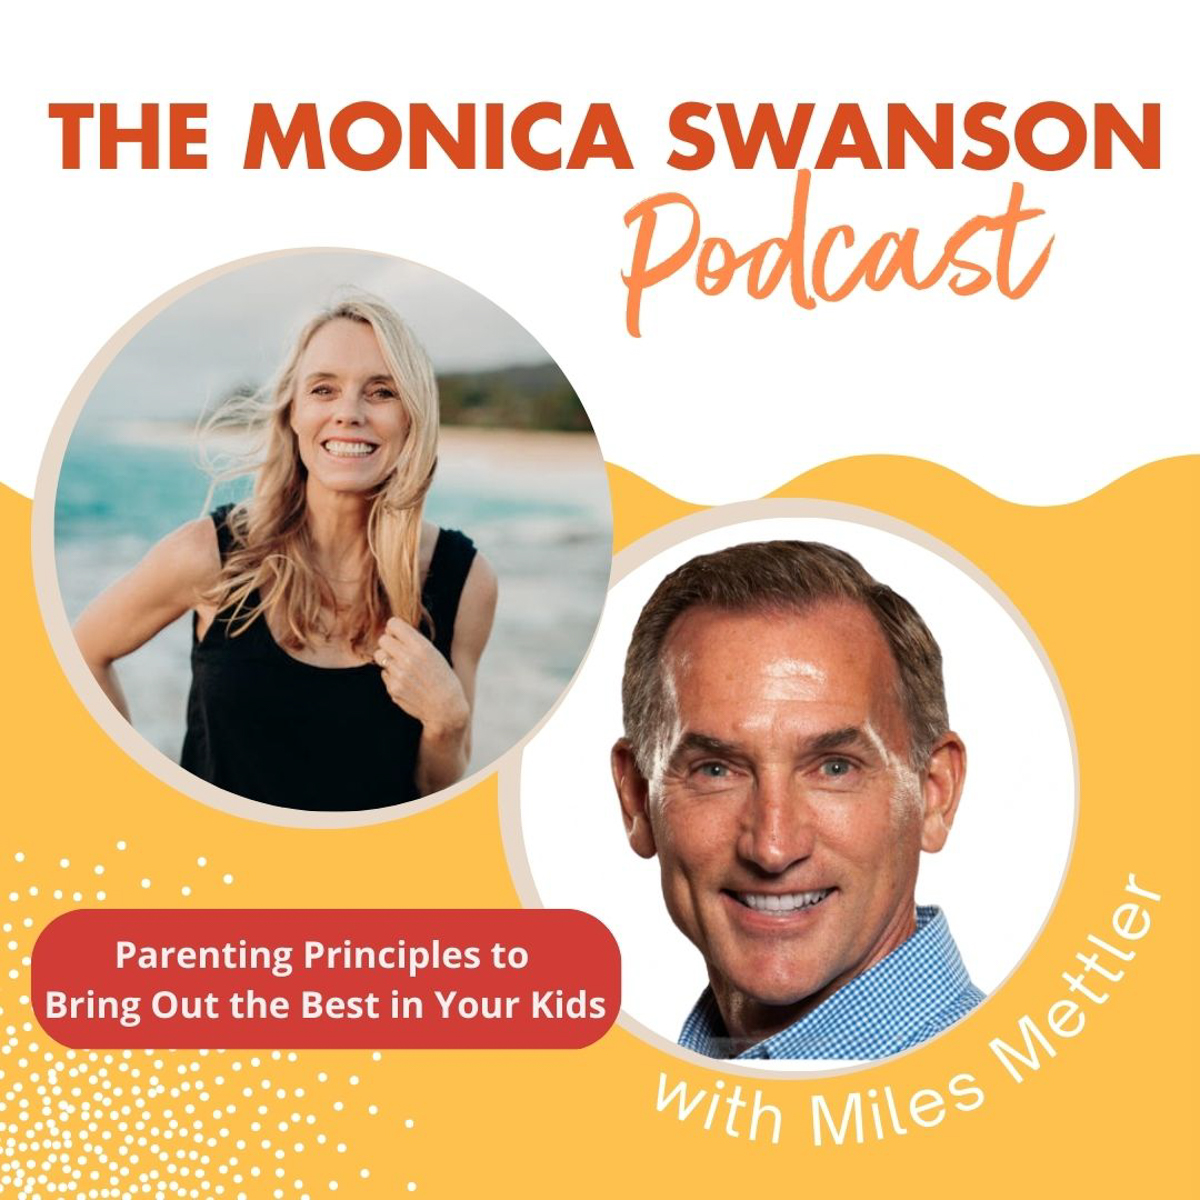 Parenting Principles to Bring out the BEST in Your Kids with Miles Mettler